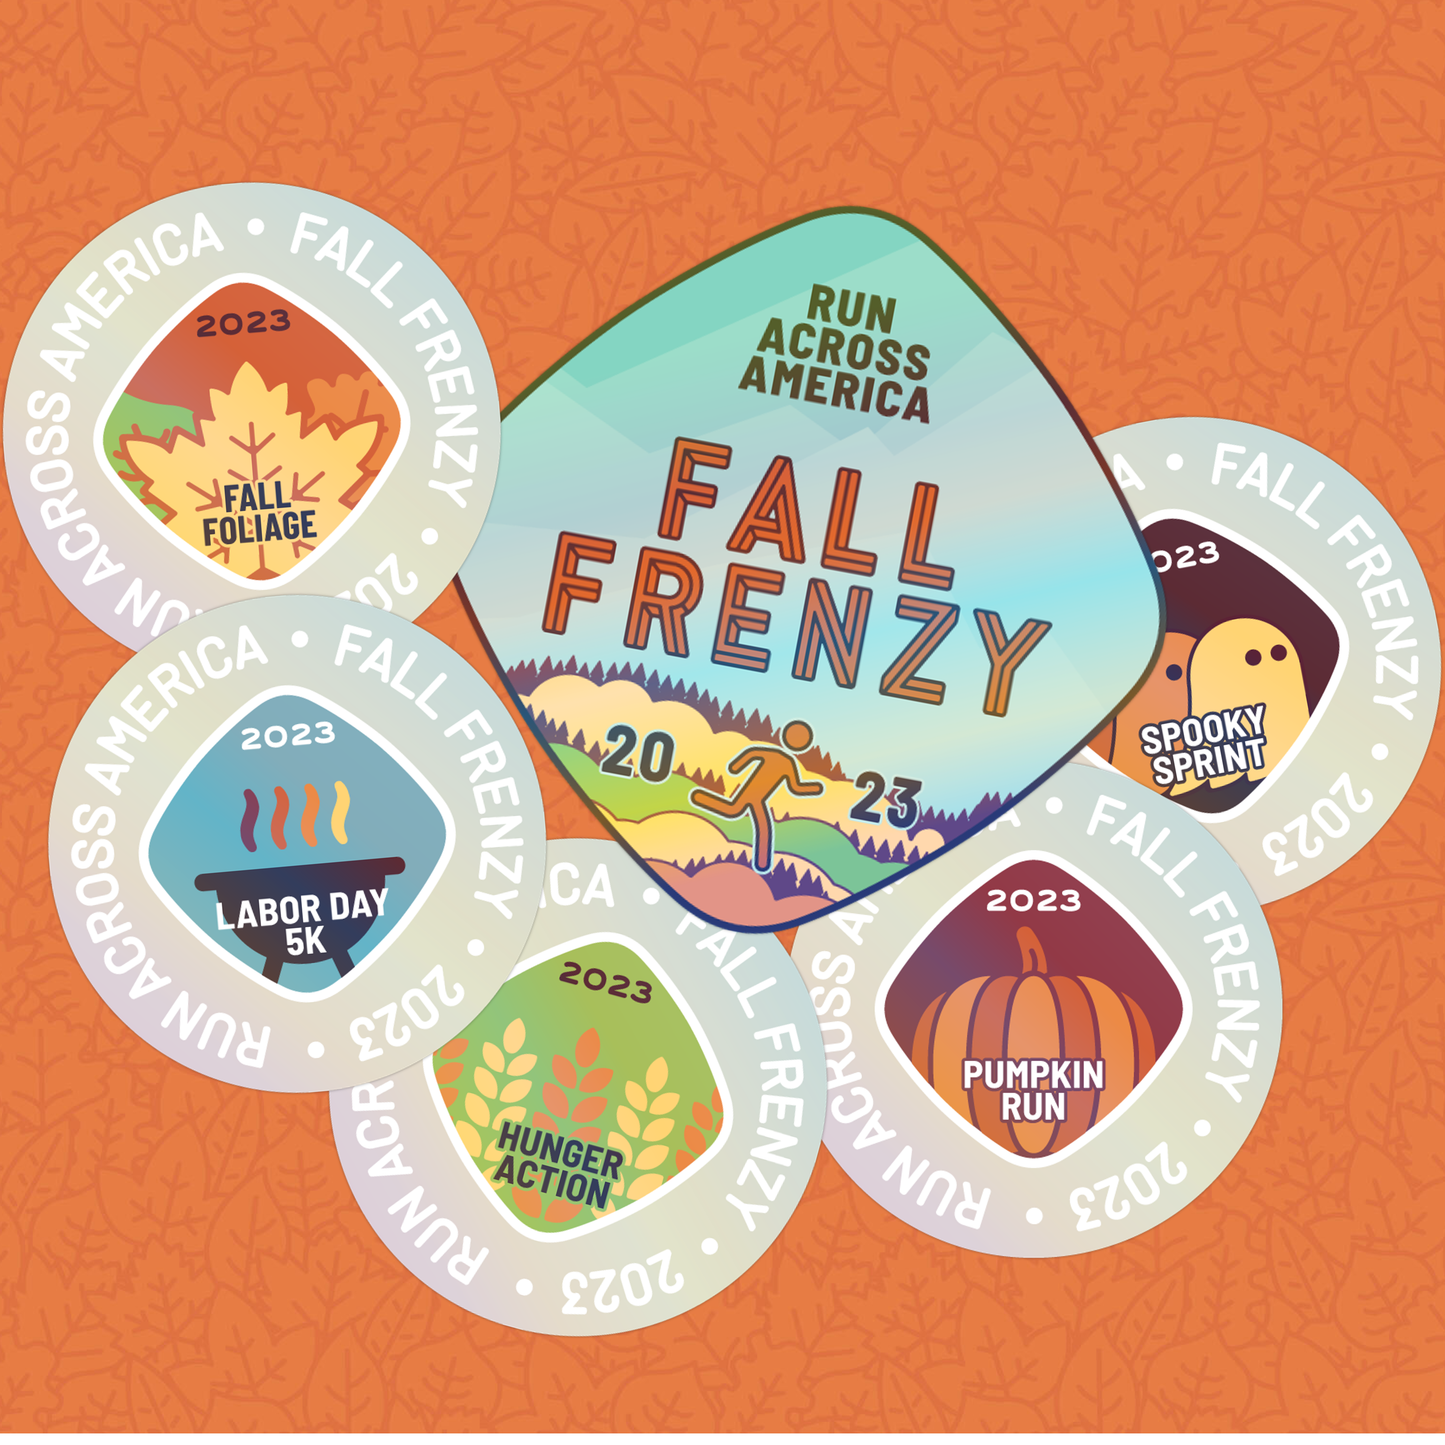 Holographic stickers: Fall Frenzy 2023